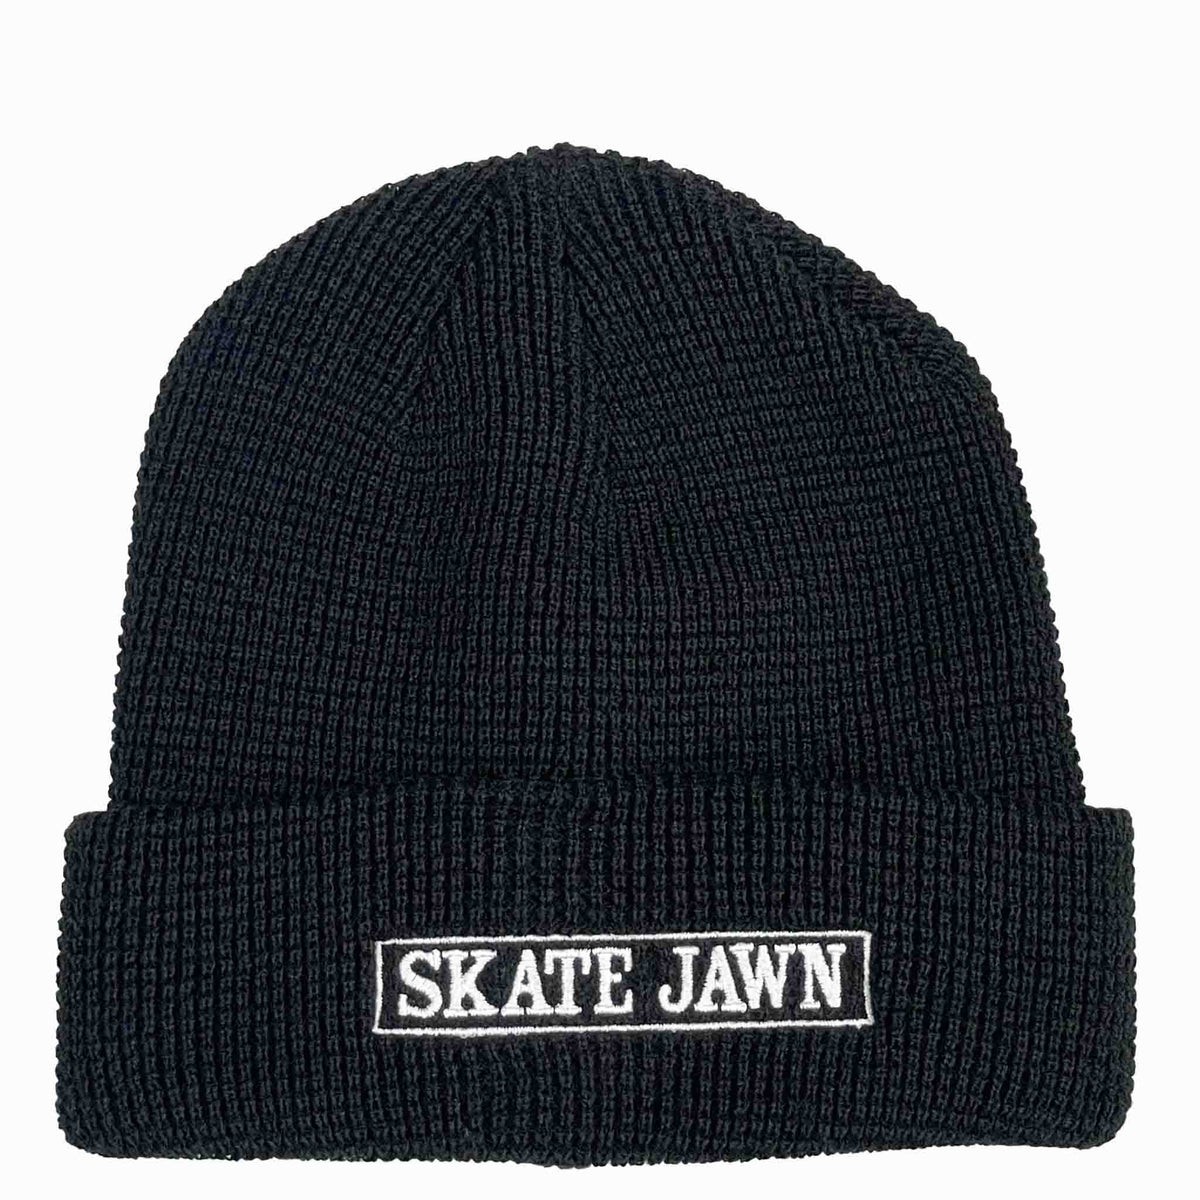 Skate Jawn - Cover Box Thermal Knit Beanie - Black